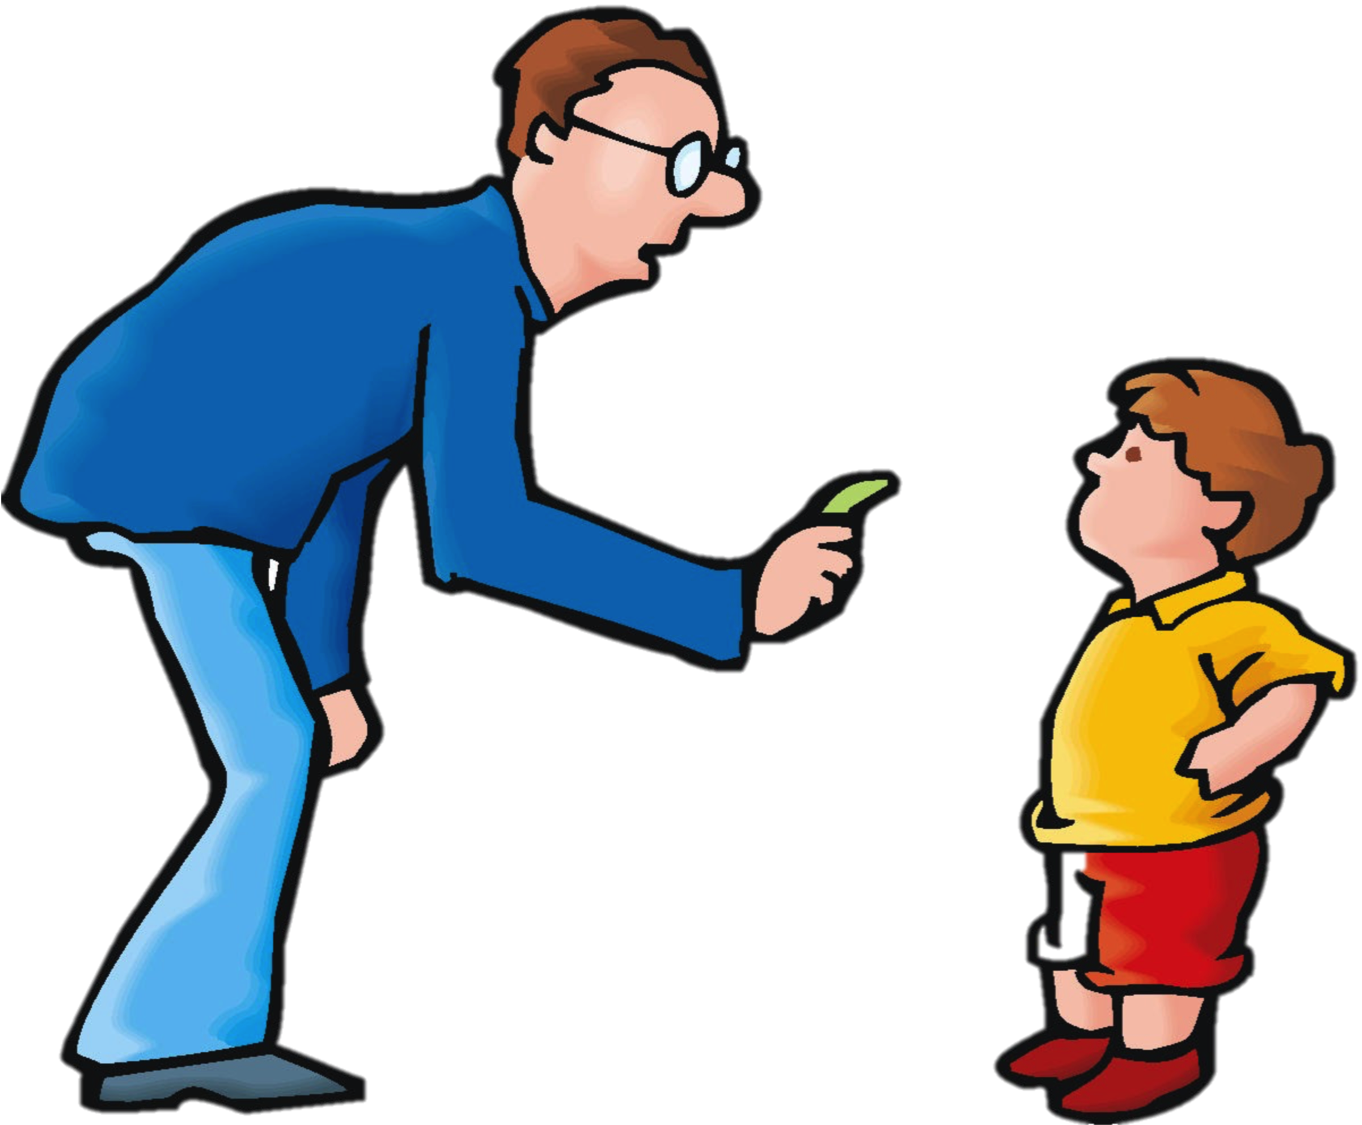 Download and share clipart about Bad Behavior Between All The Students, Don...